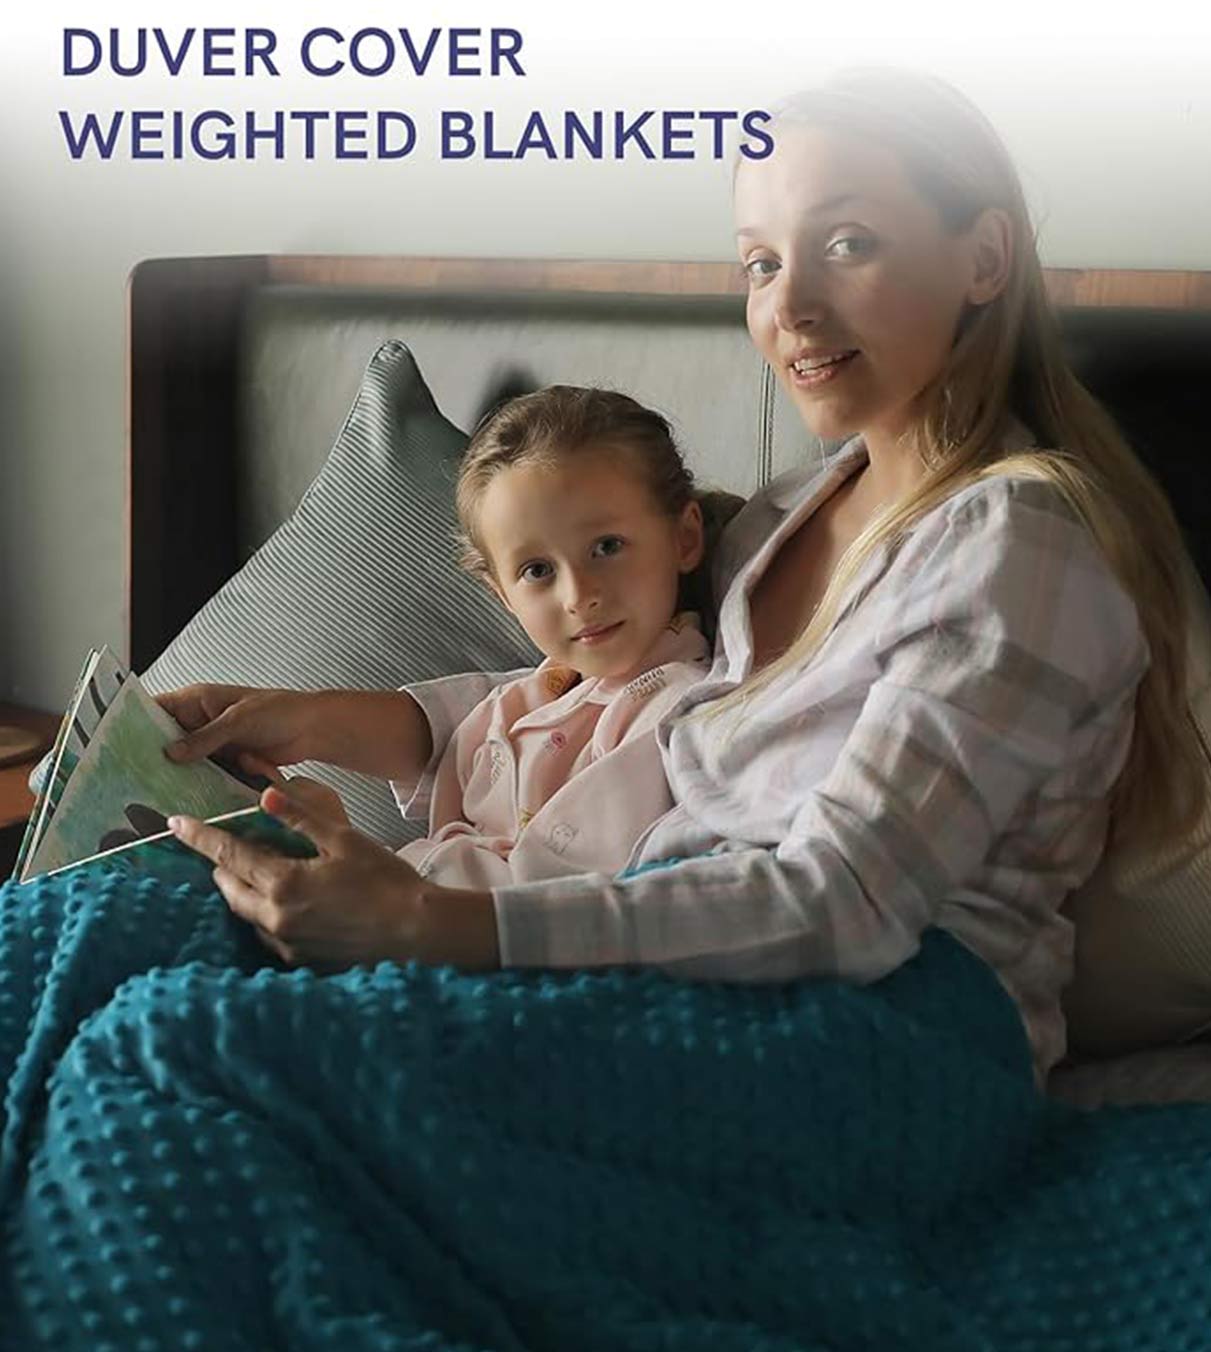 Product: Soft Weighted Blanket Duvet Cover | Color: Minky Green